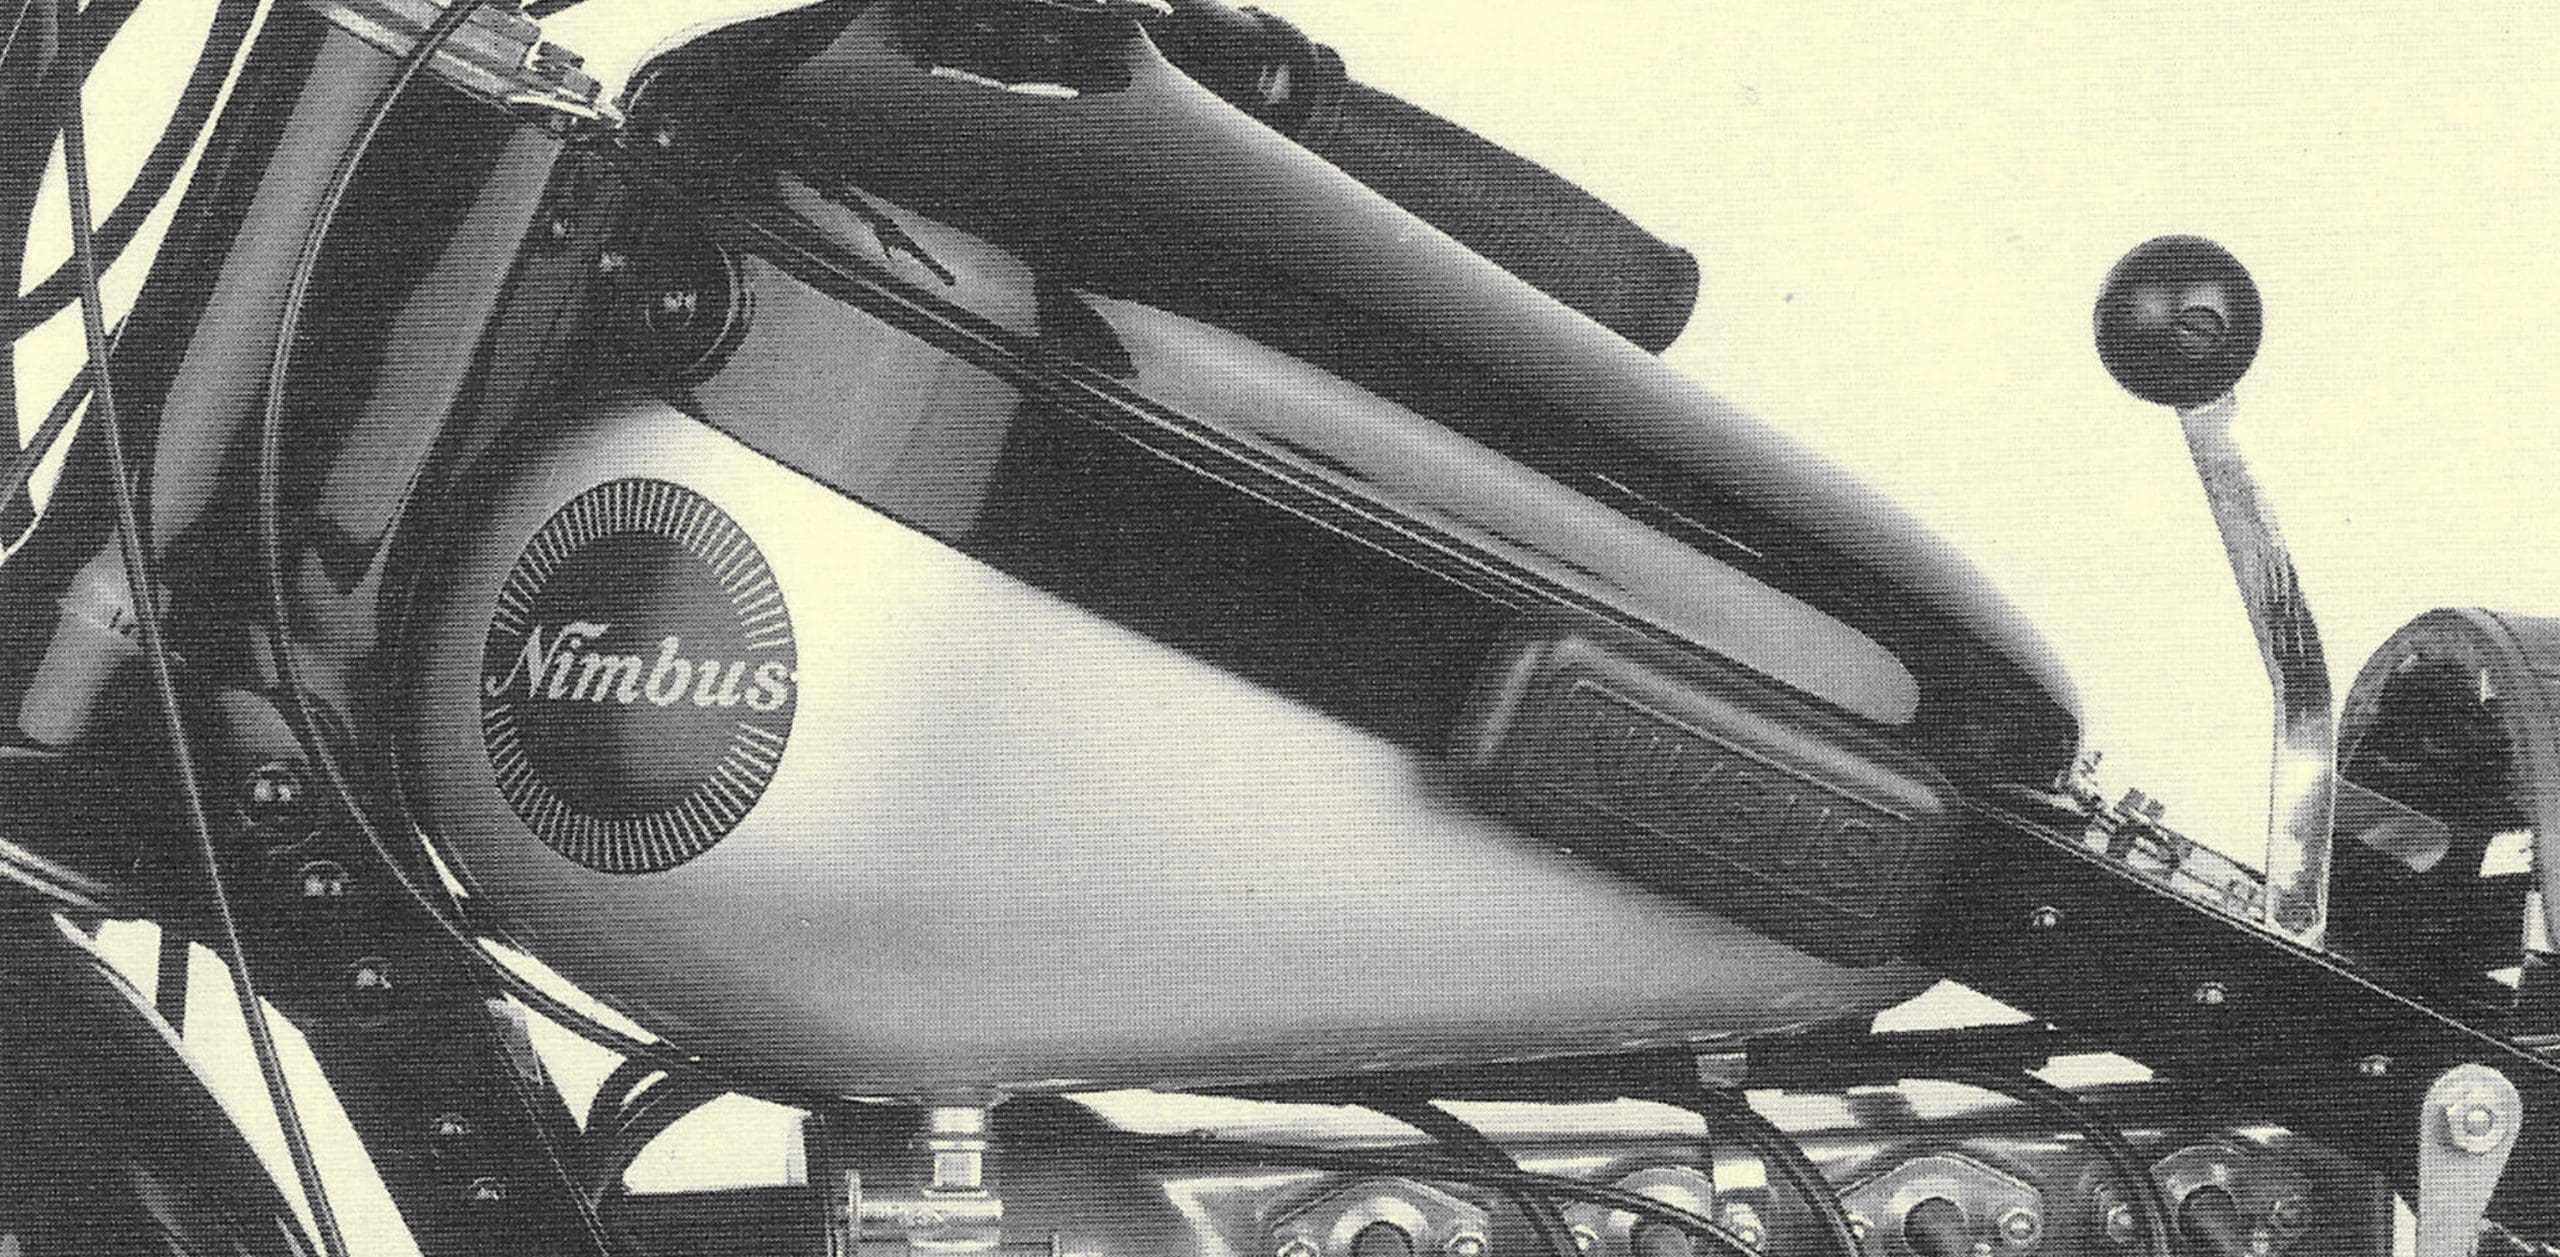 A view of an older Nimbus motorcycles. Media sourced from Nimbus.